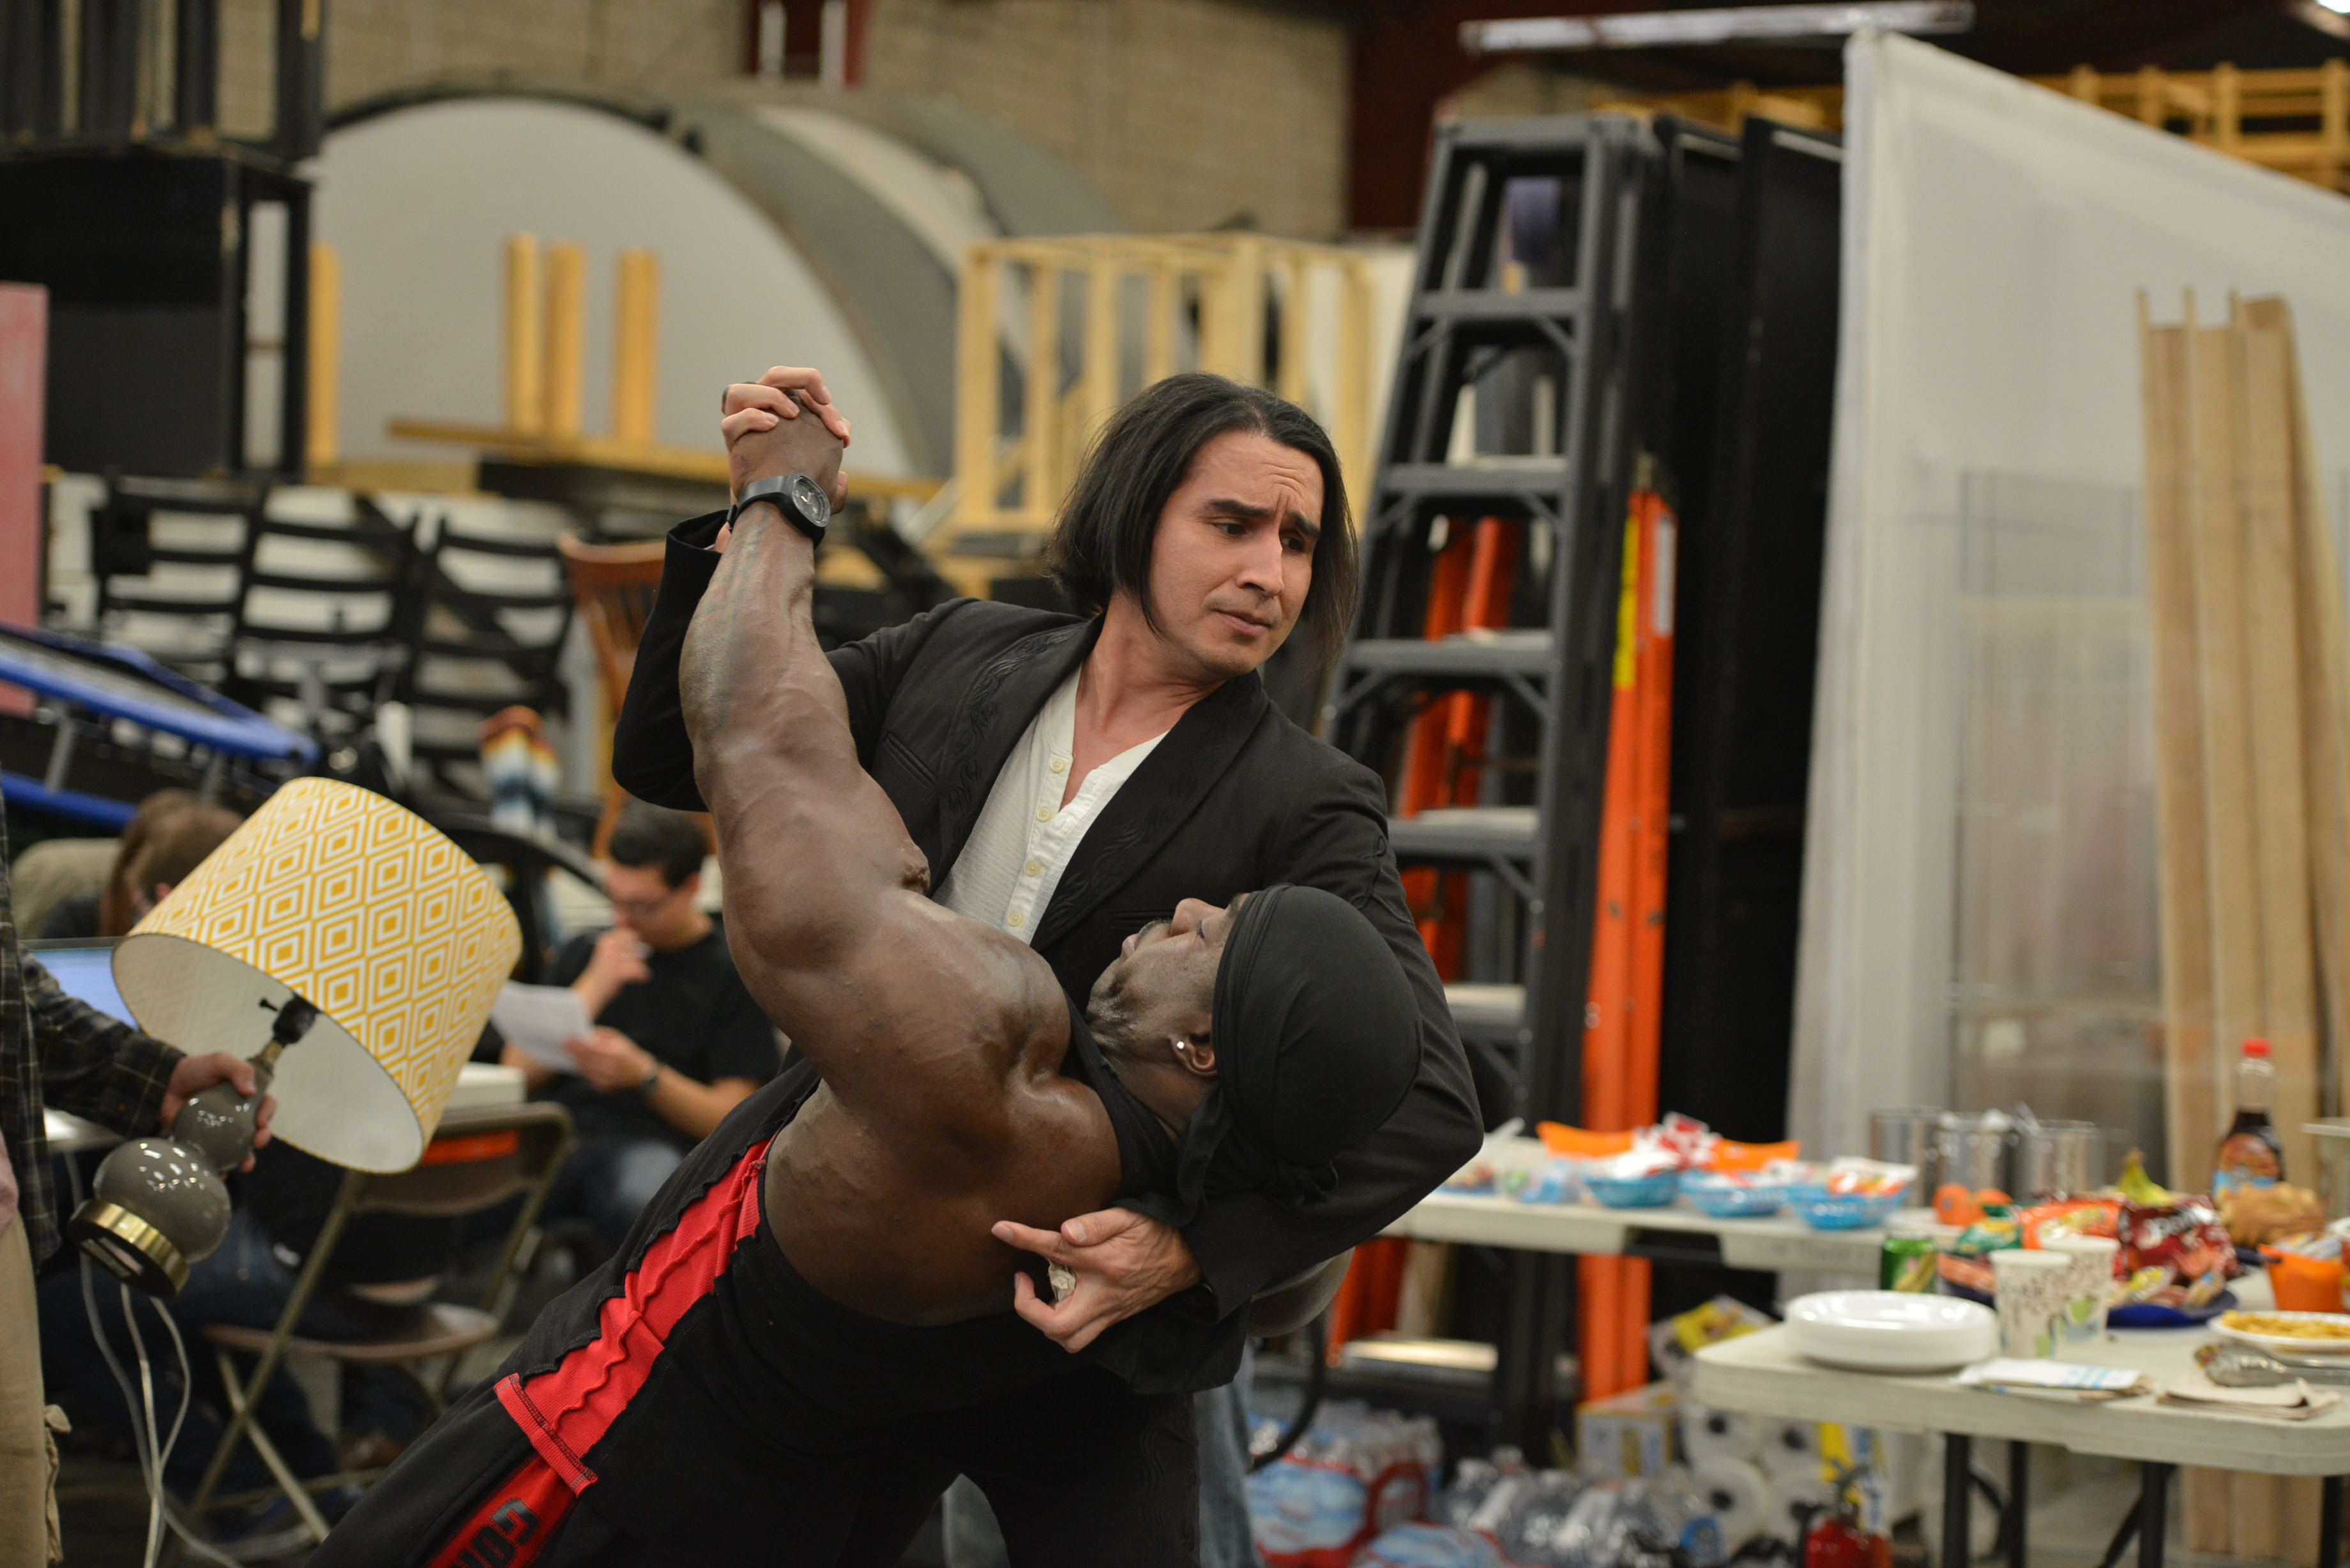 Downtime with Kali Muscle, couple of tough guys on the set of The Martini Shot